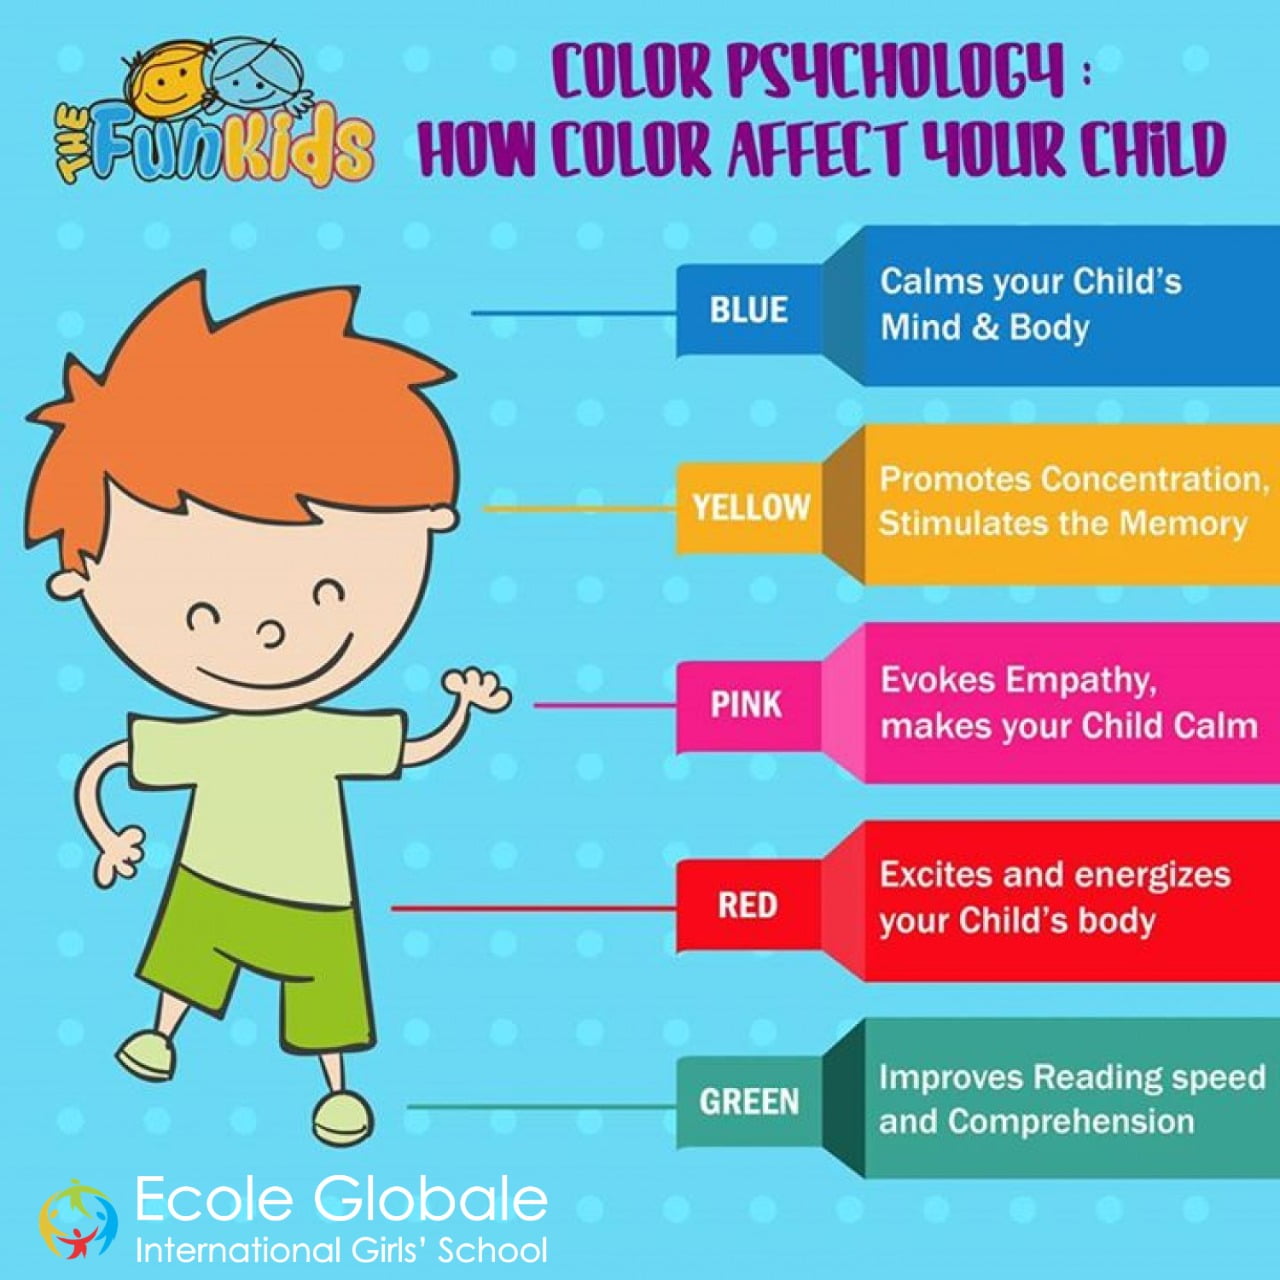 What color makes kids happy?